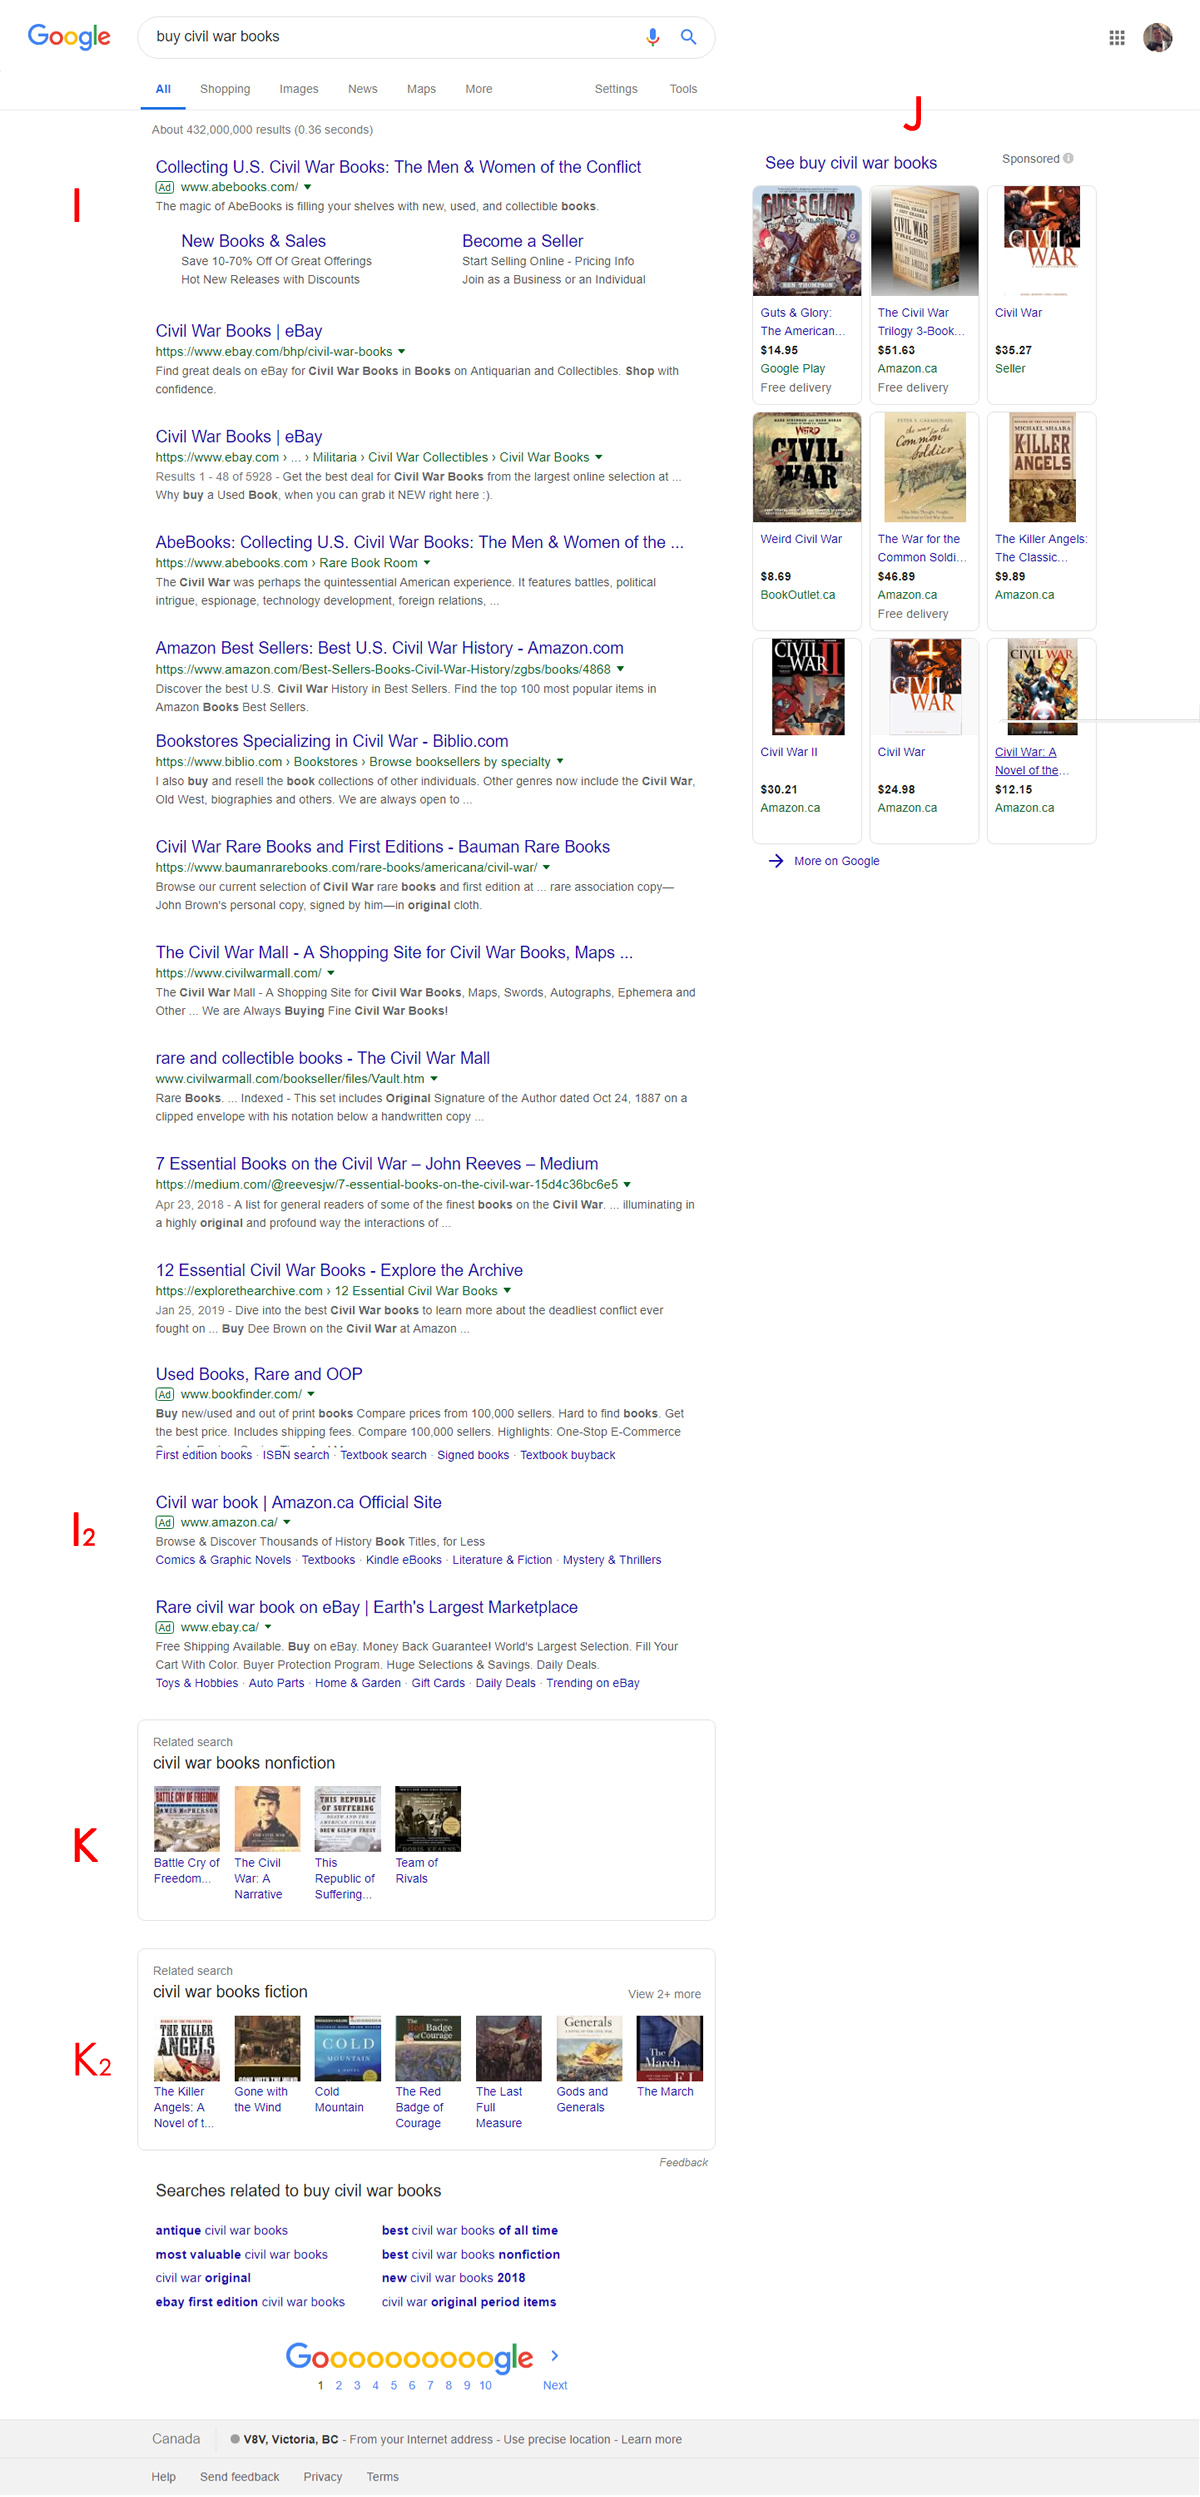 How Search Engines Display Search Results